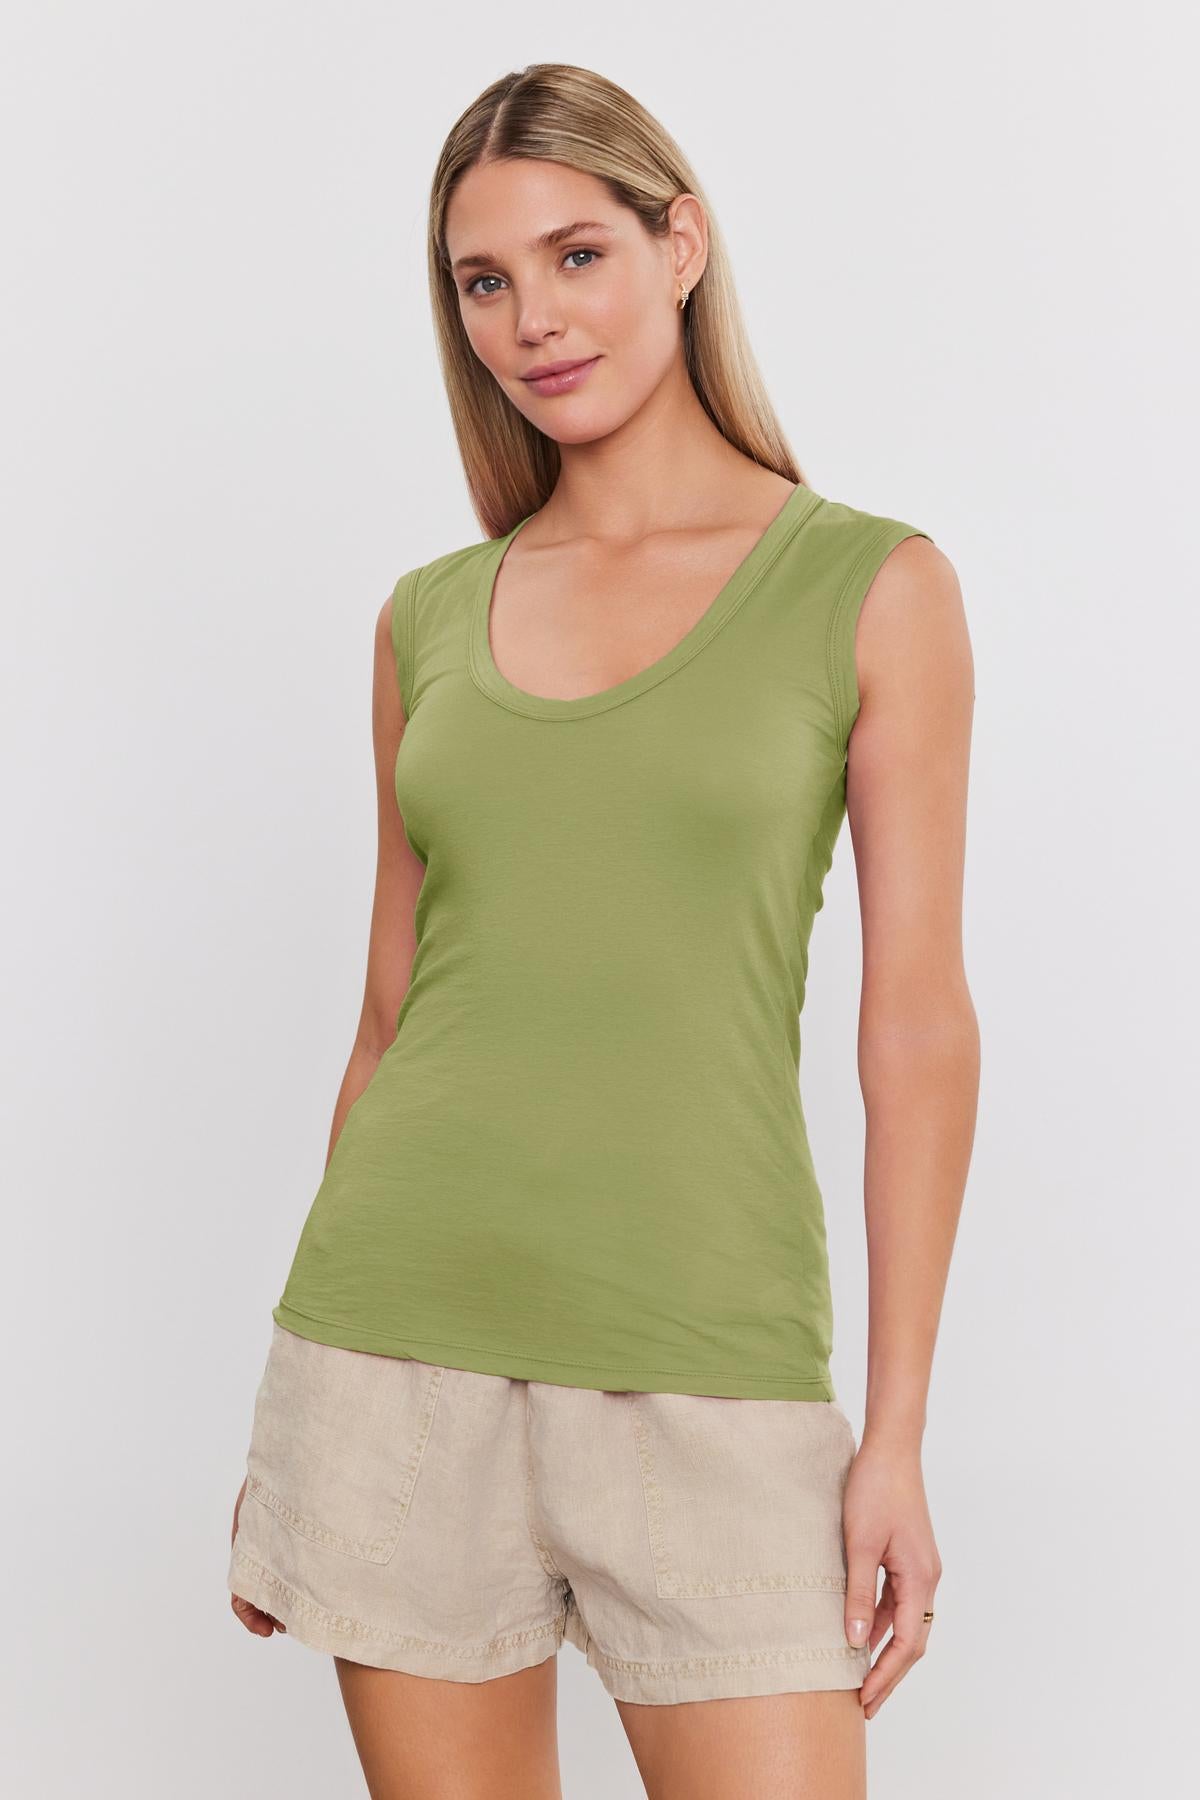   Person with long hair wearing a green ESTINA TANK TOP by Velvet by Graham & Spencer and beige shorts, standing against a white background. 